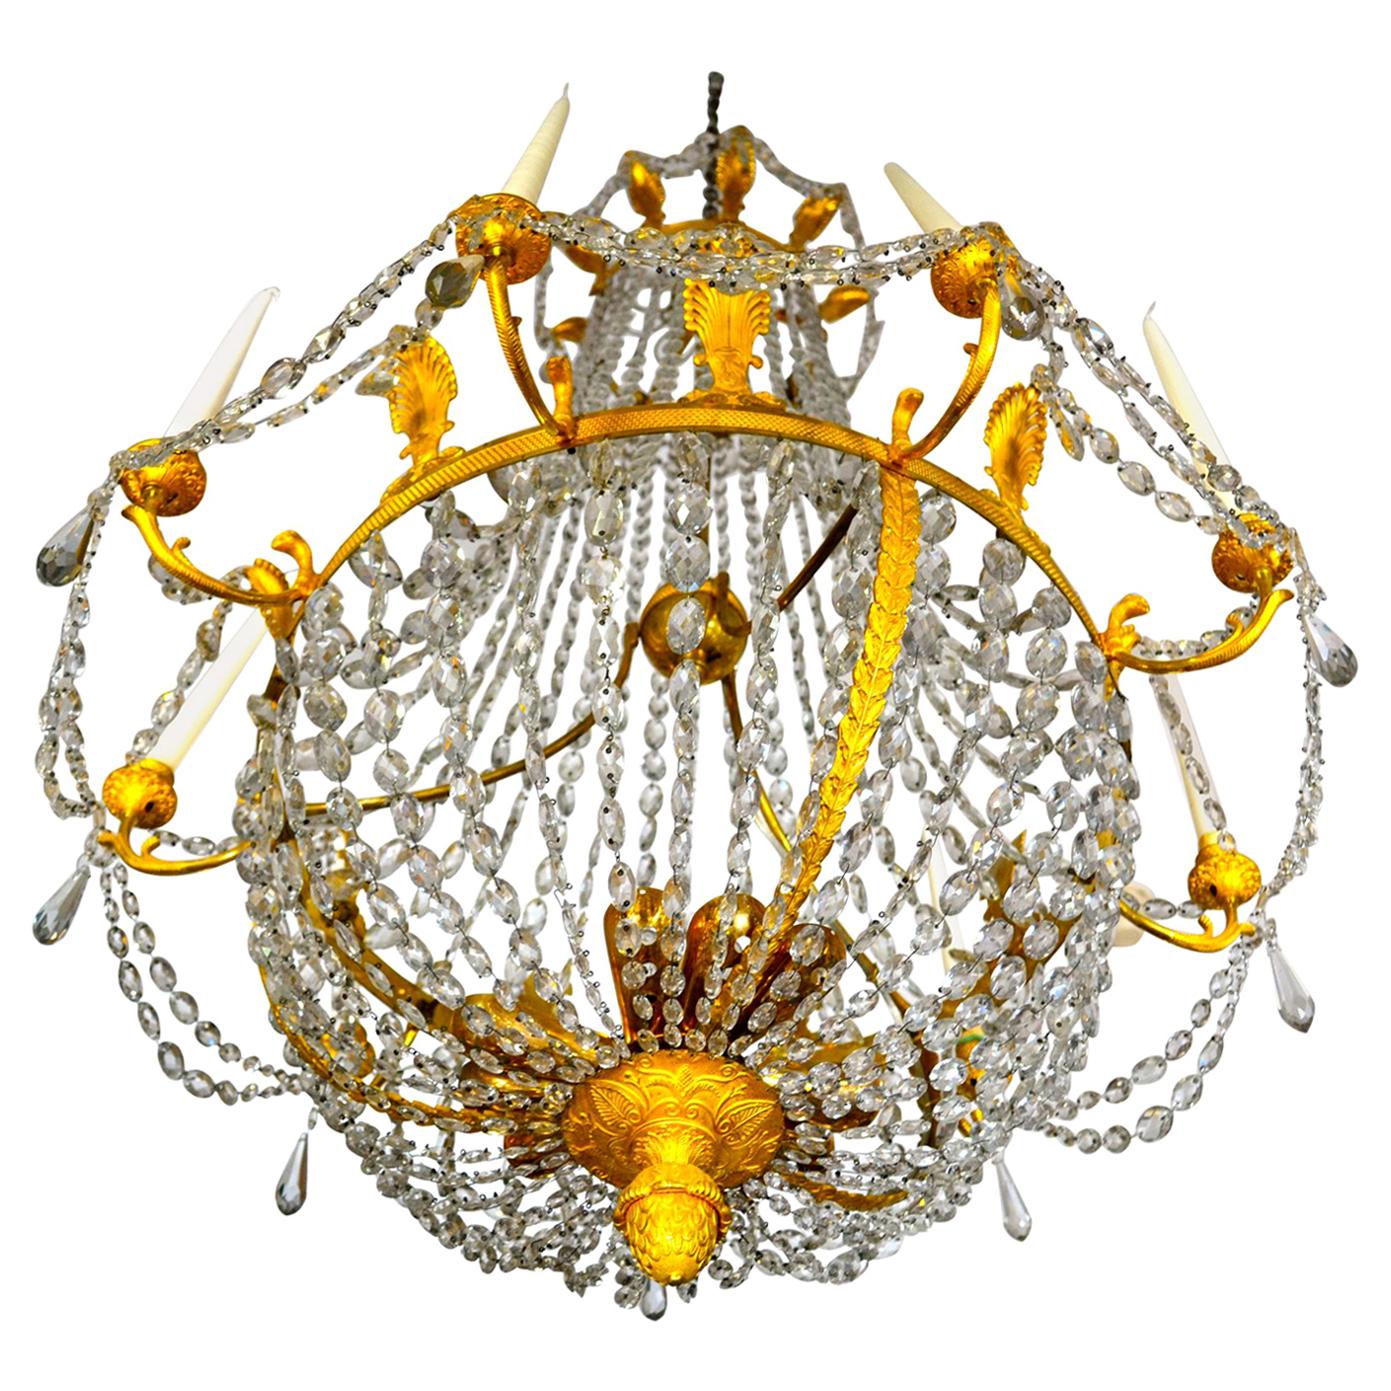 A period French Empire crystal and gilt bronze nine candle bell shaped chandelier of the highest quality; the circular corona surmounted by palm shaped finials suspending swagged crystal chains supporting a cascade of crystal drops to a main finely